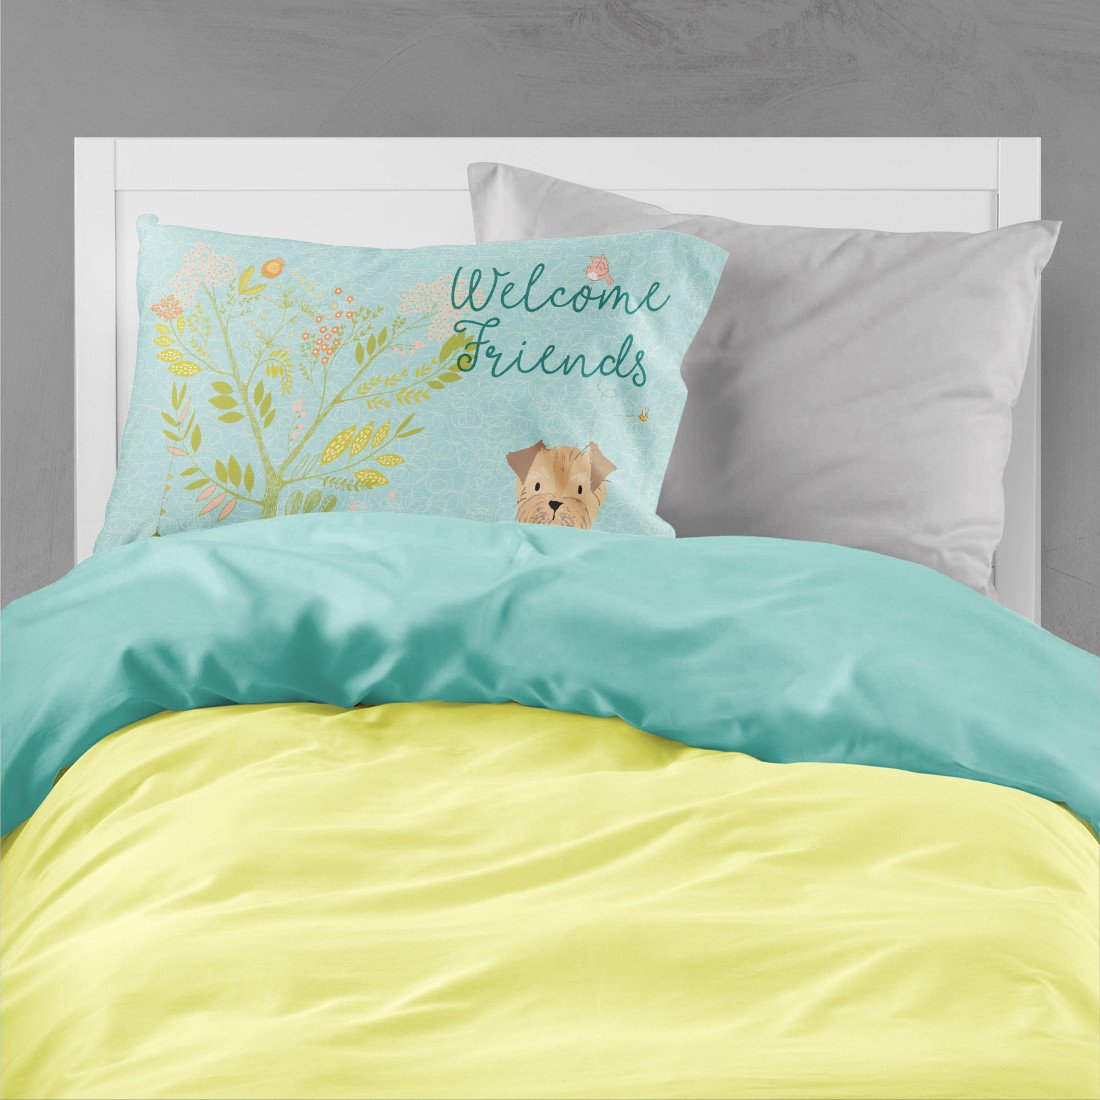 Welcome Friends Yorkie Natural Ears Fabric Standard Pillowcase BB7642PILLOWCASE by Caroline's Treasures